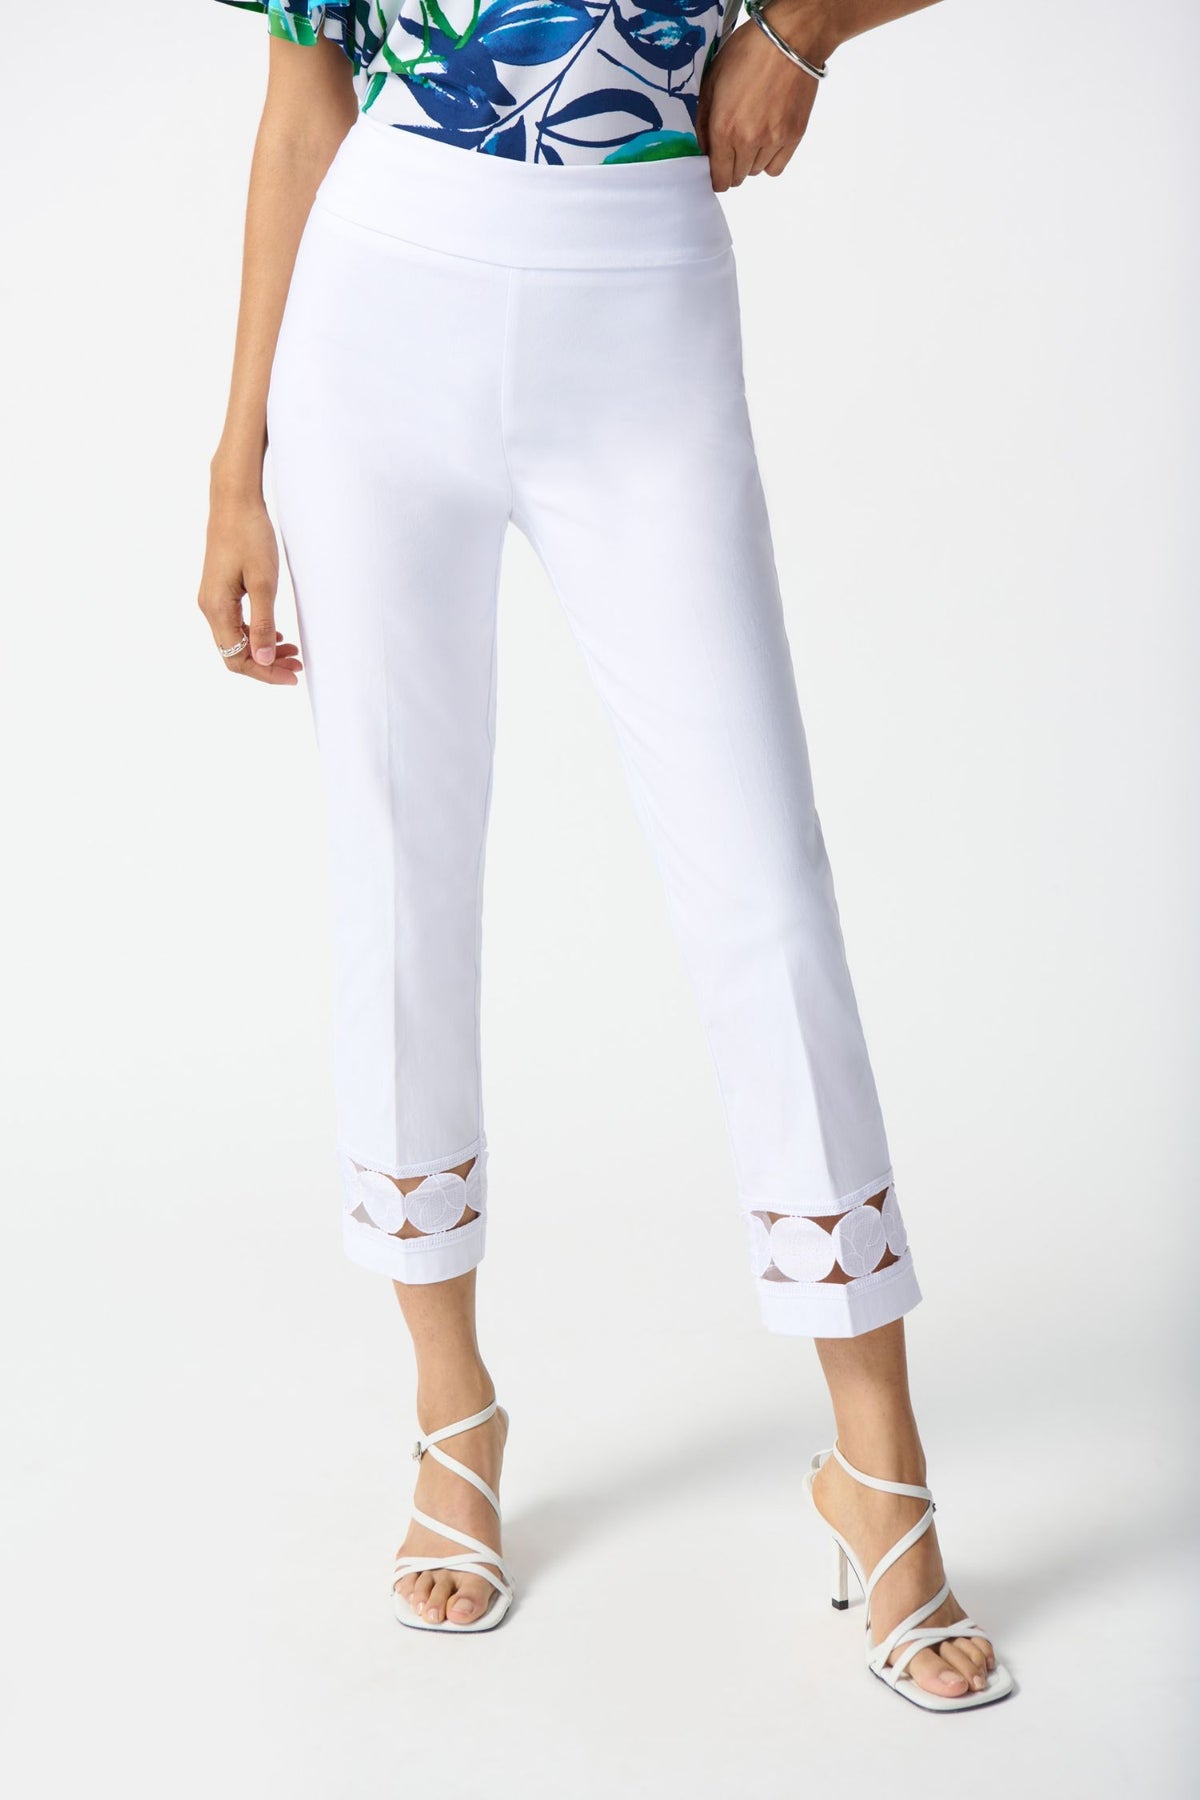 Joseph Ribkoff Millennium Cropped Pull-On Pants - Style 242131, front, white